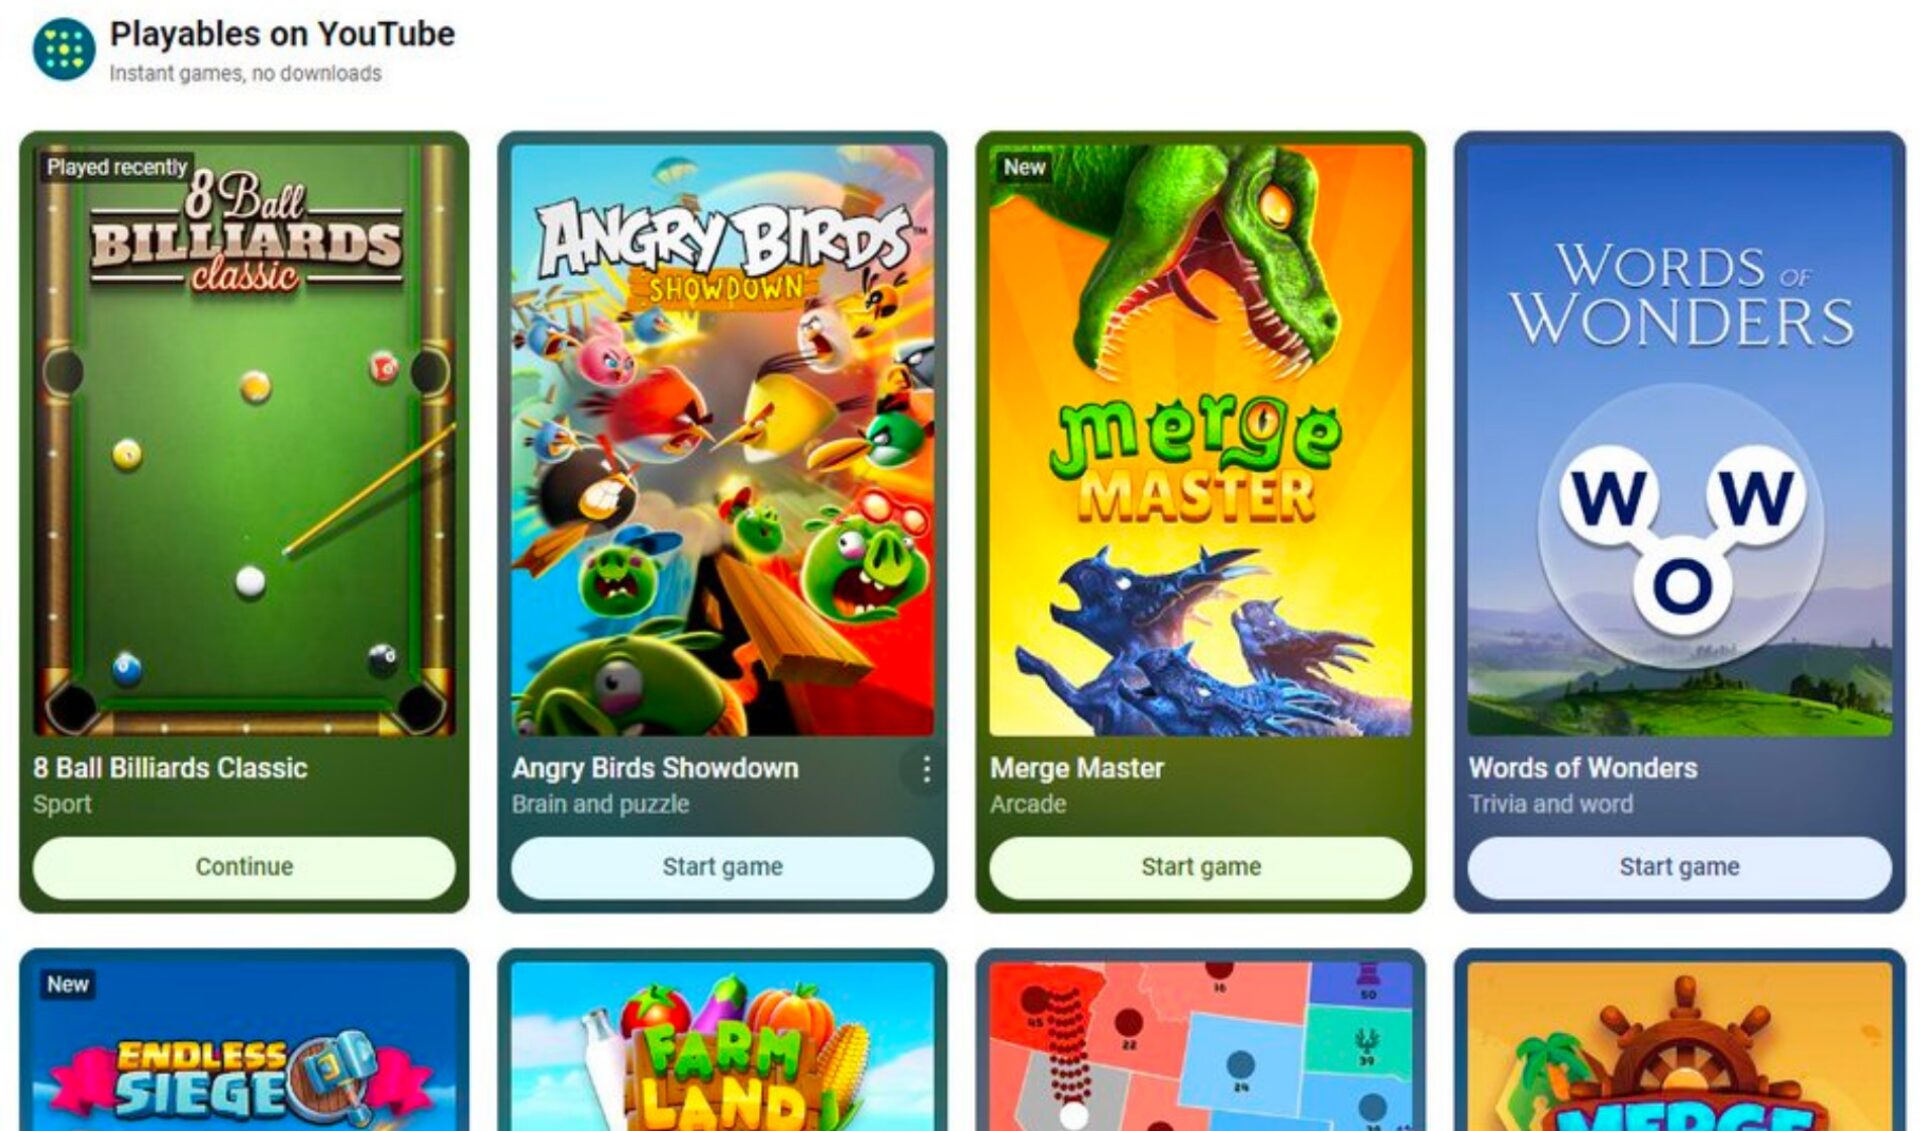 YouTube Premium subscribers can now find “Playables” through new gaming hub